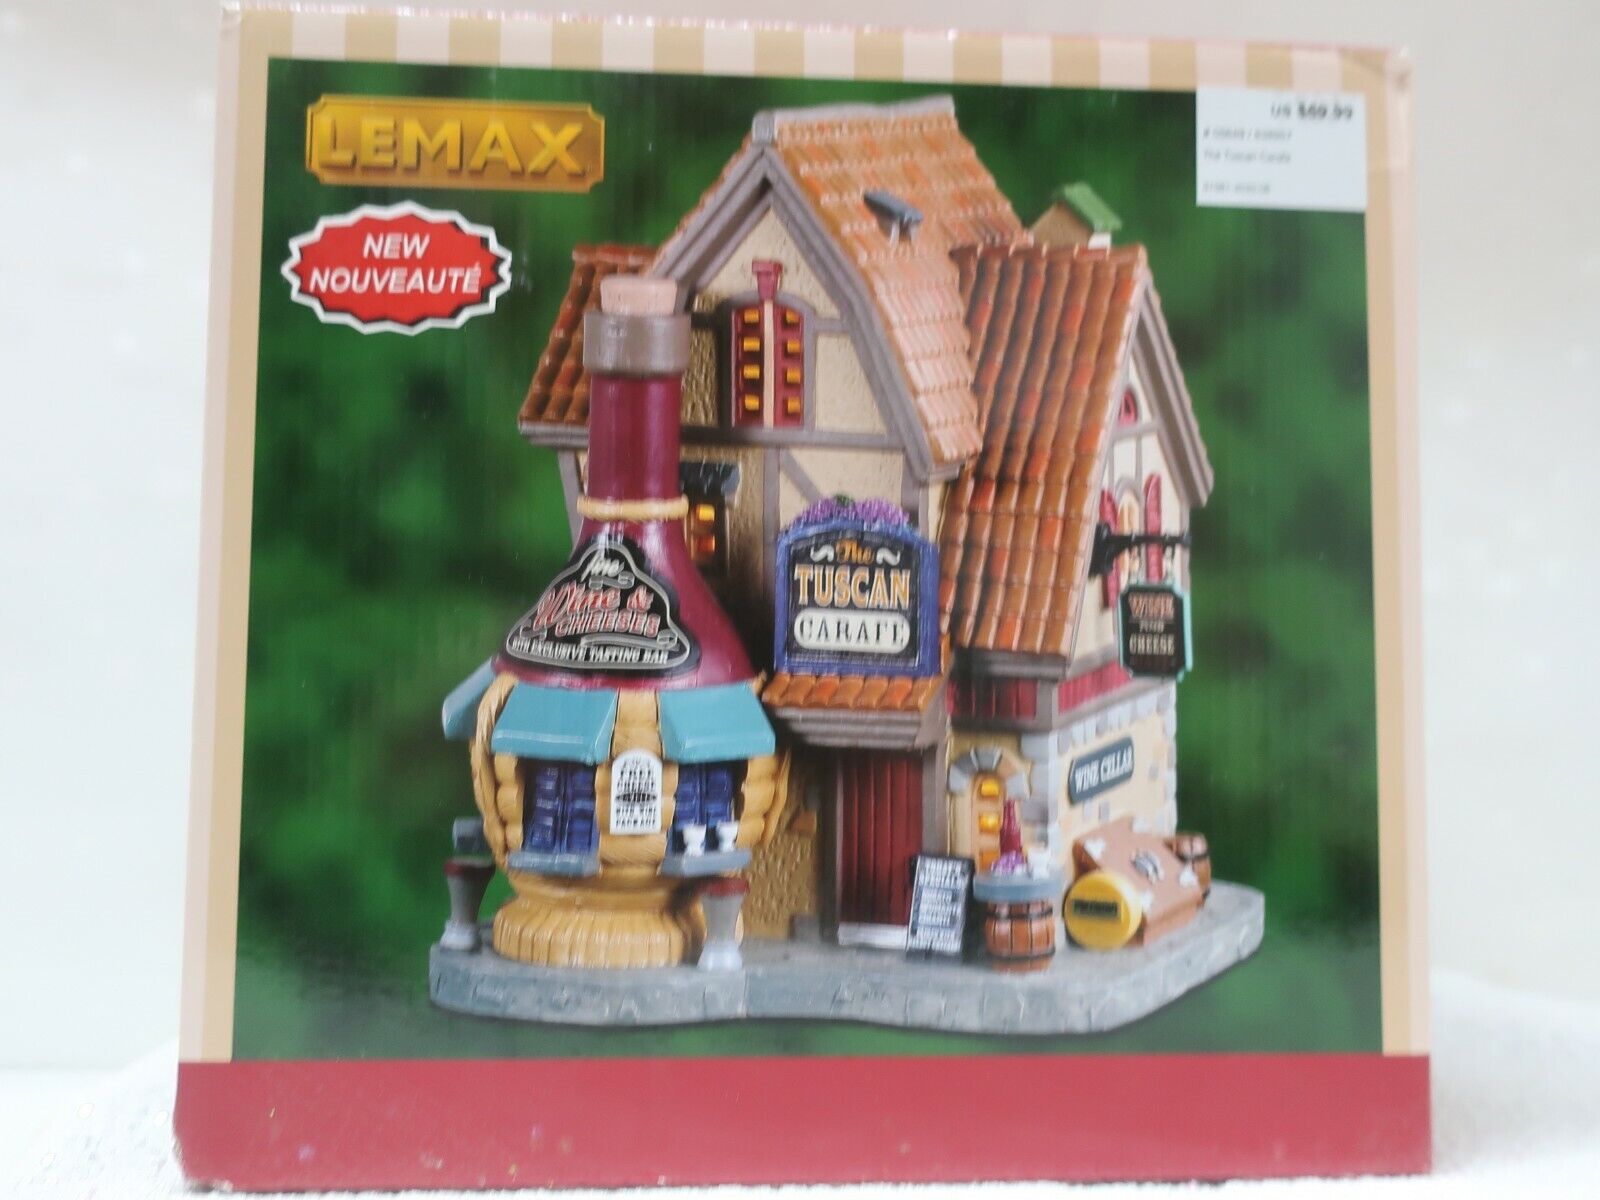 Lemax Christmas Village - 2020 The Tuscan Carafe NEW IN BOX